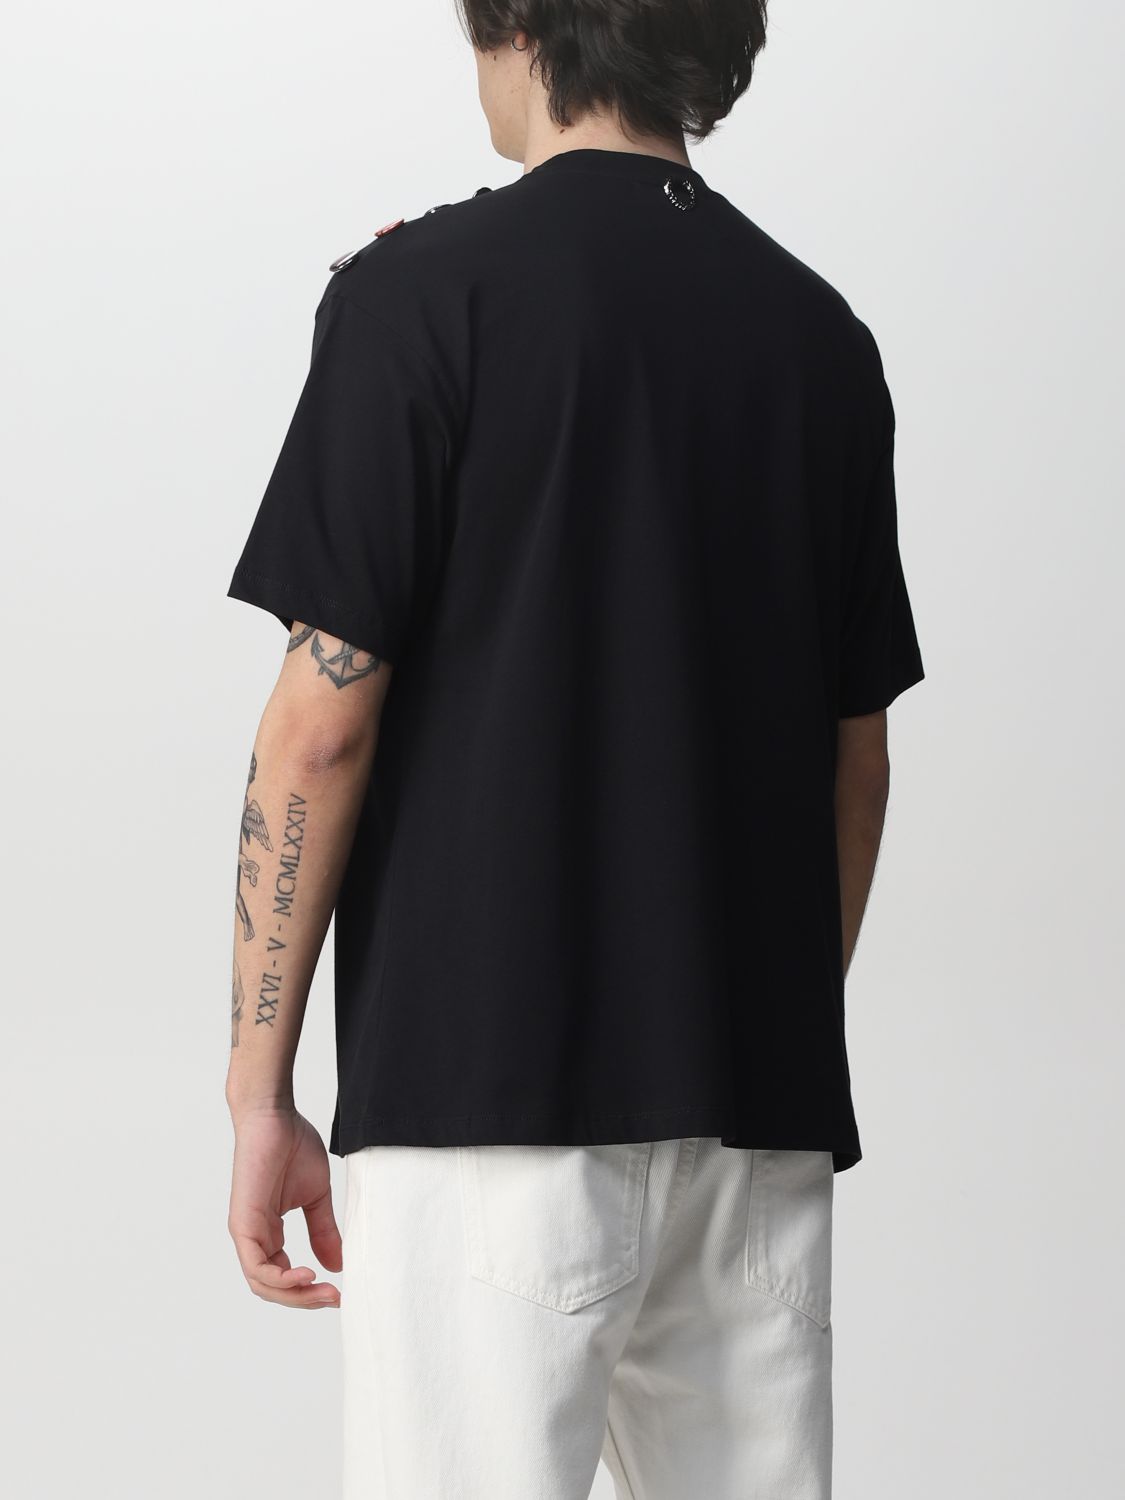 T-shirt Fred Perry By Raf Simons: T-shirt Fred Perry By Raf Simons con logo nero 2